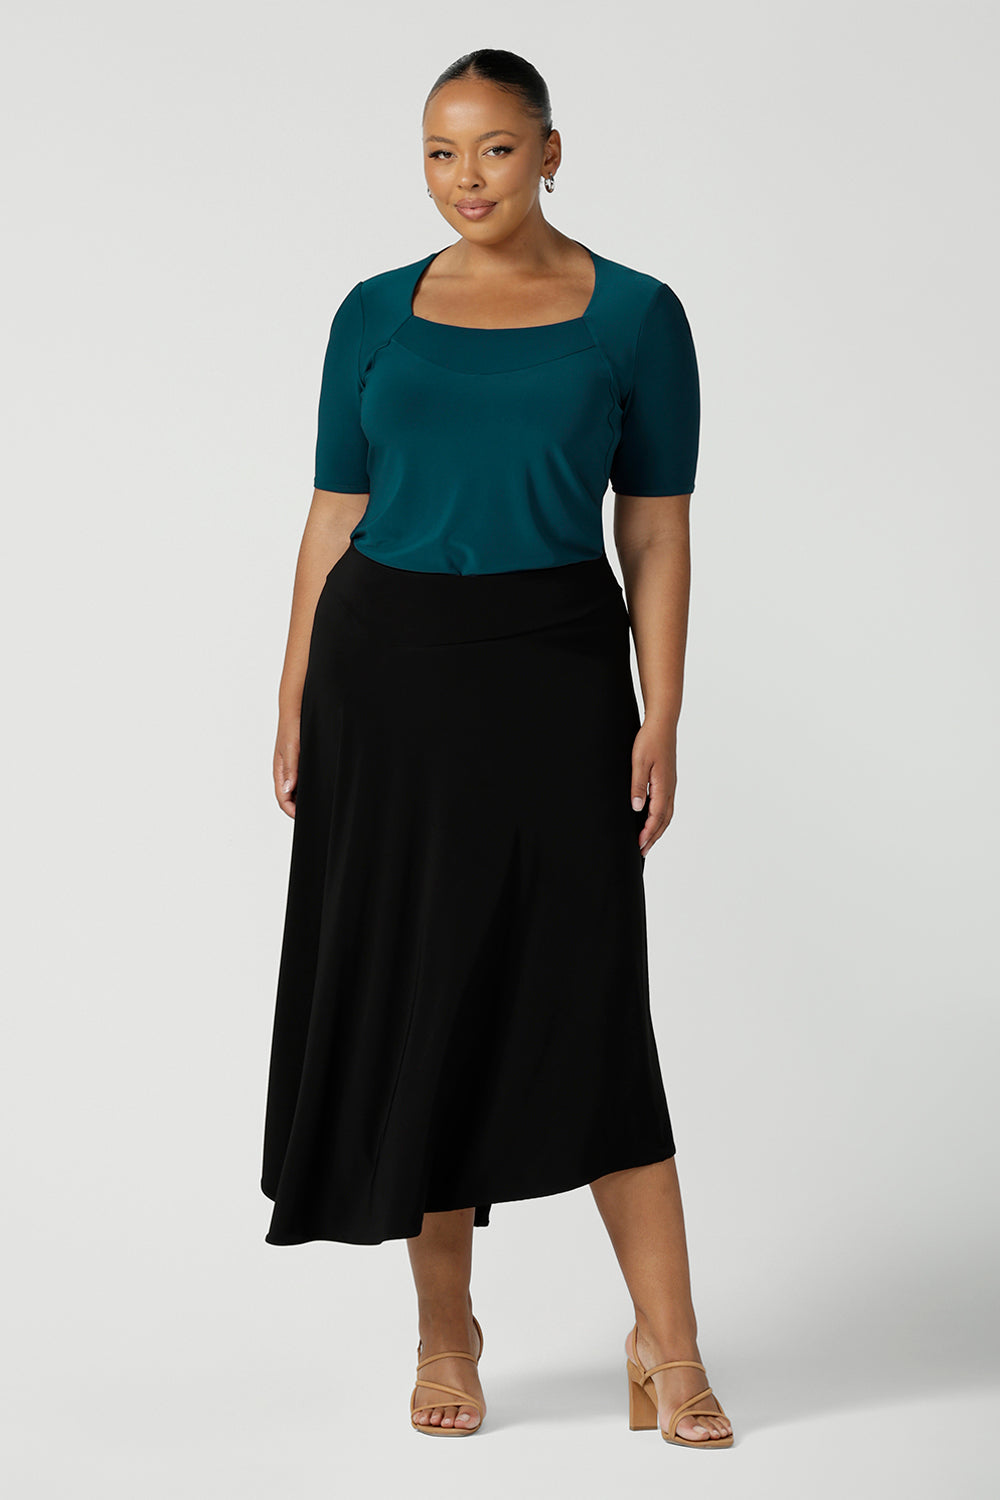 A size 18, plus size woman wears an asymmetric skirt in black jersey. Worn with a teal green short sleeve top with square neck, this comfortable jersey skirt works for work wear and eveningwear. Made in Australia by women's clothing brand, Leina & Fleur in petite, mid size and plus sizes. 